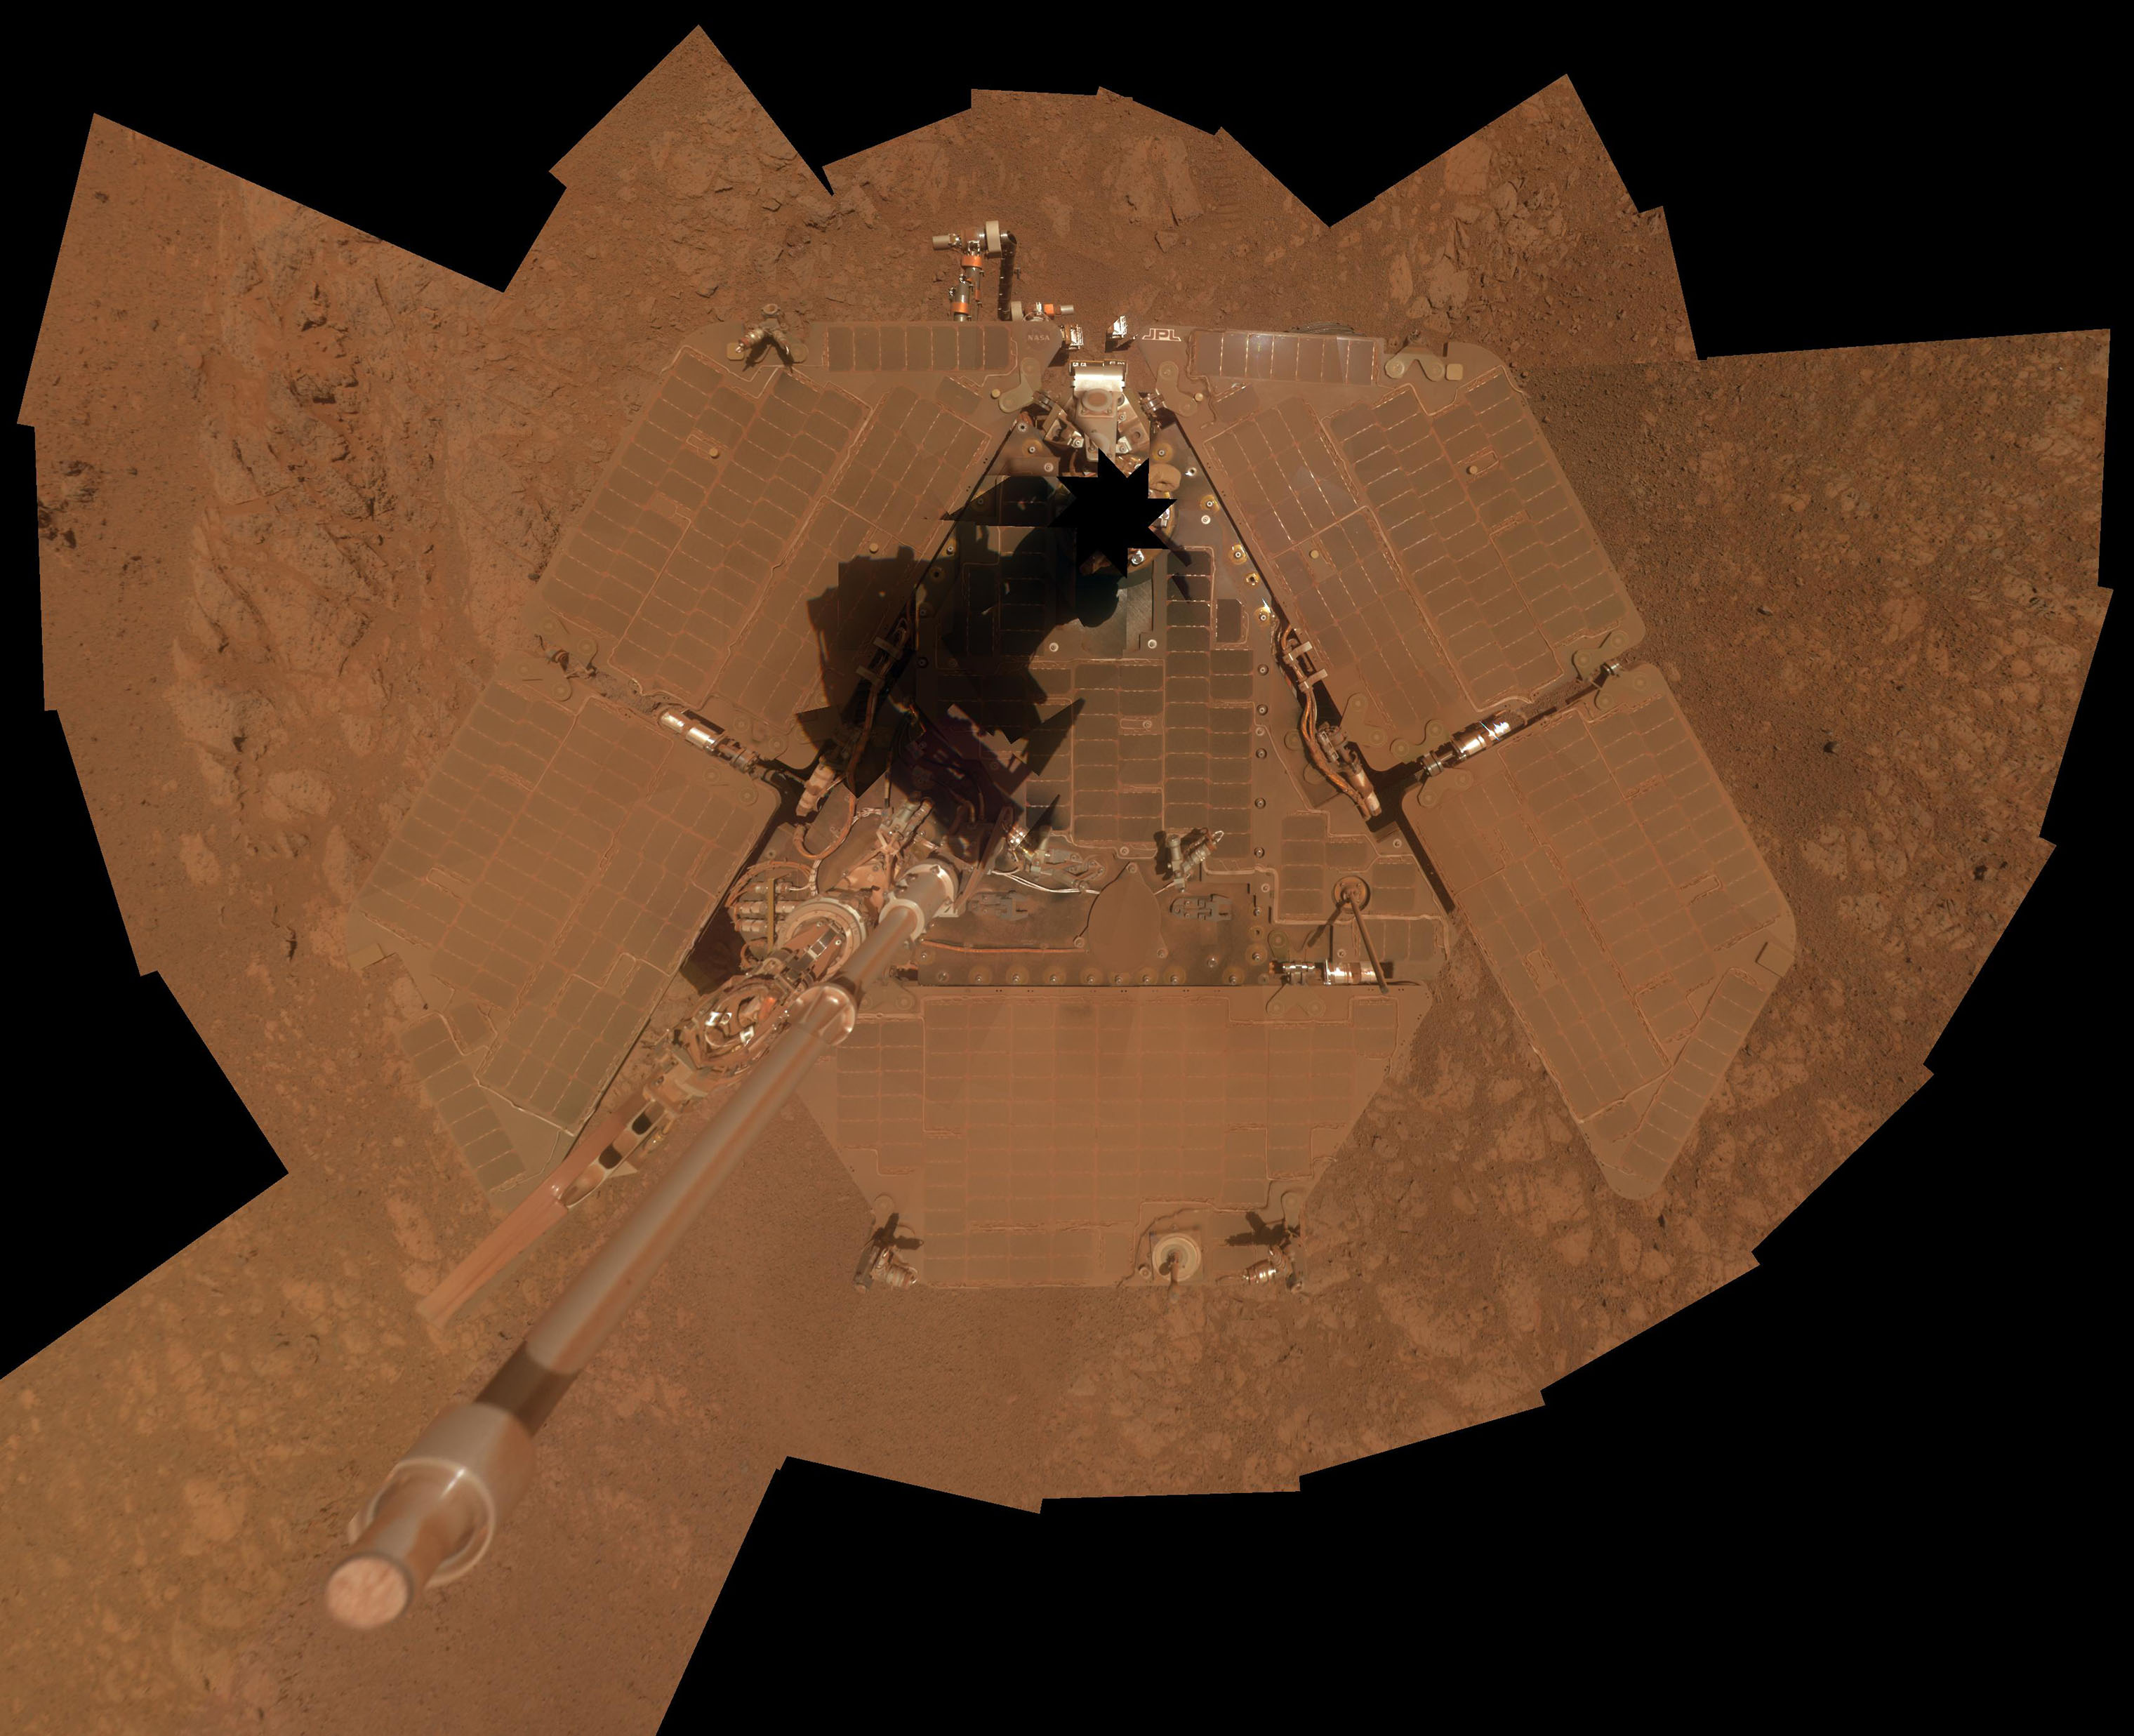 Opportunity recorded the component images for this self-portrait about three weeks before completing a decade of work on Mars. (NASA/JPL-Caltech/Cornell University/Arizona State University)